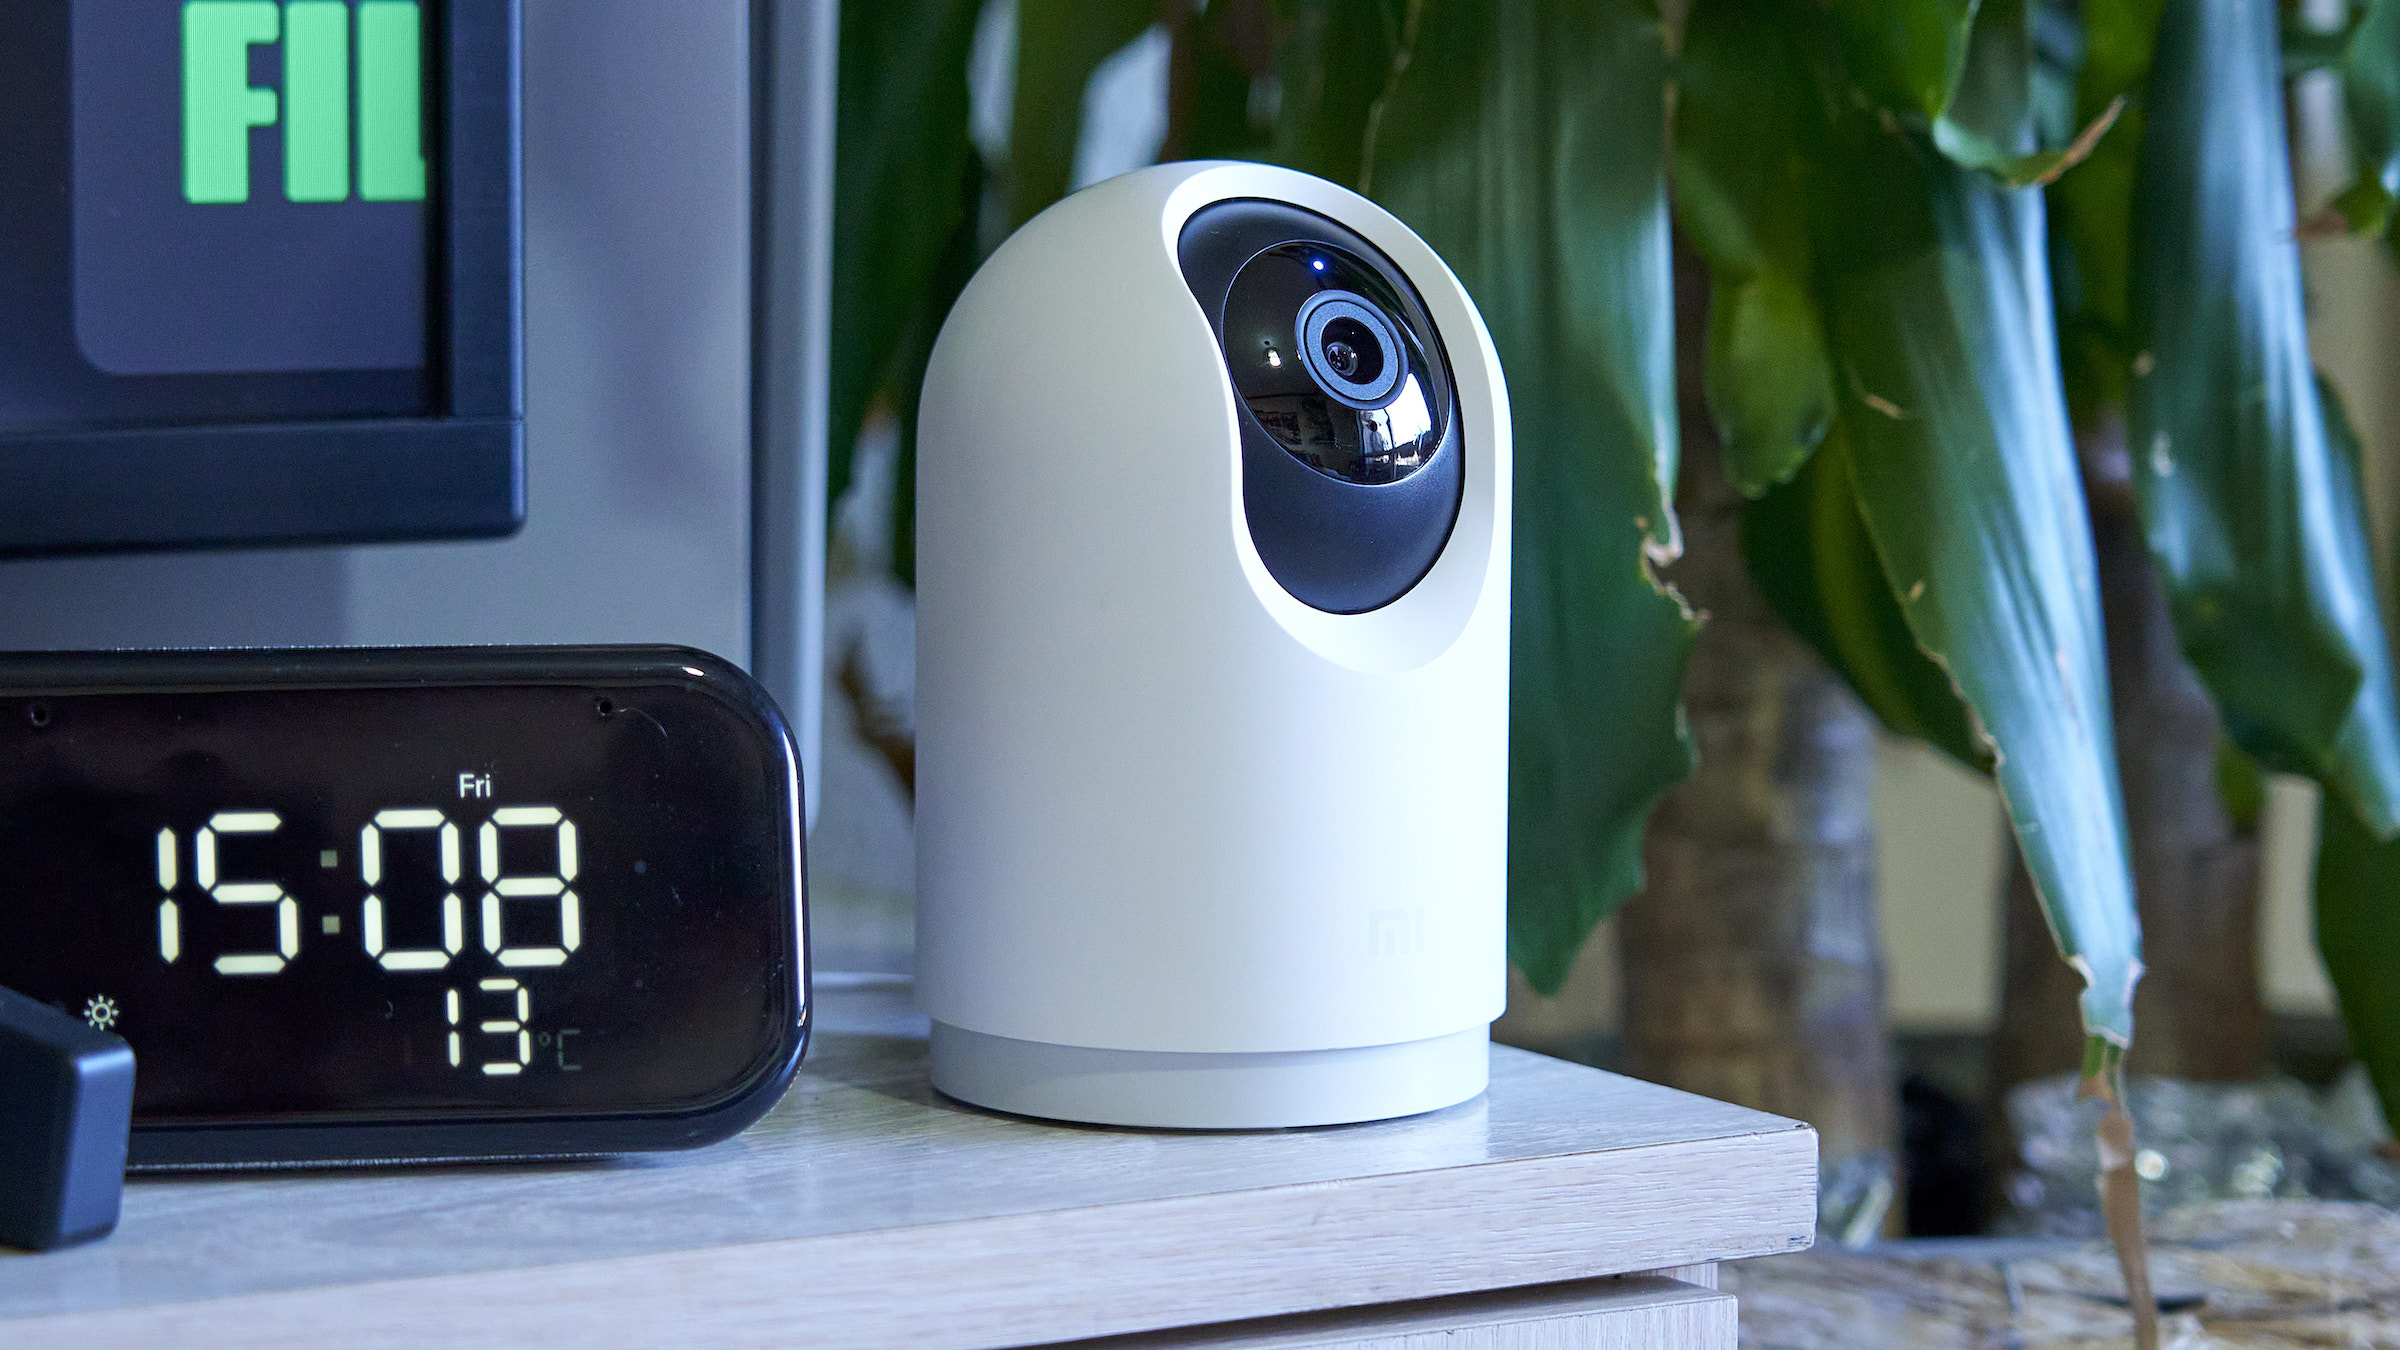 Xiaomi Mi 360 Home Security Camera 2K Pro, analysis and opinion - Latest  Game Stories